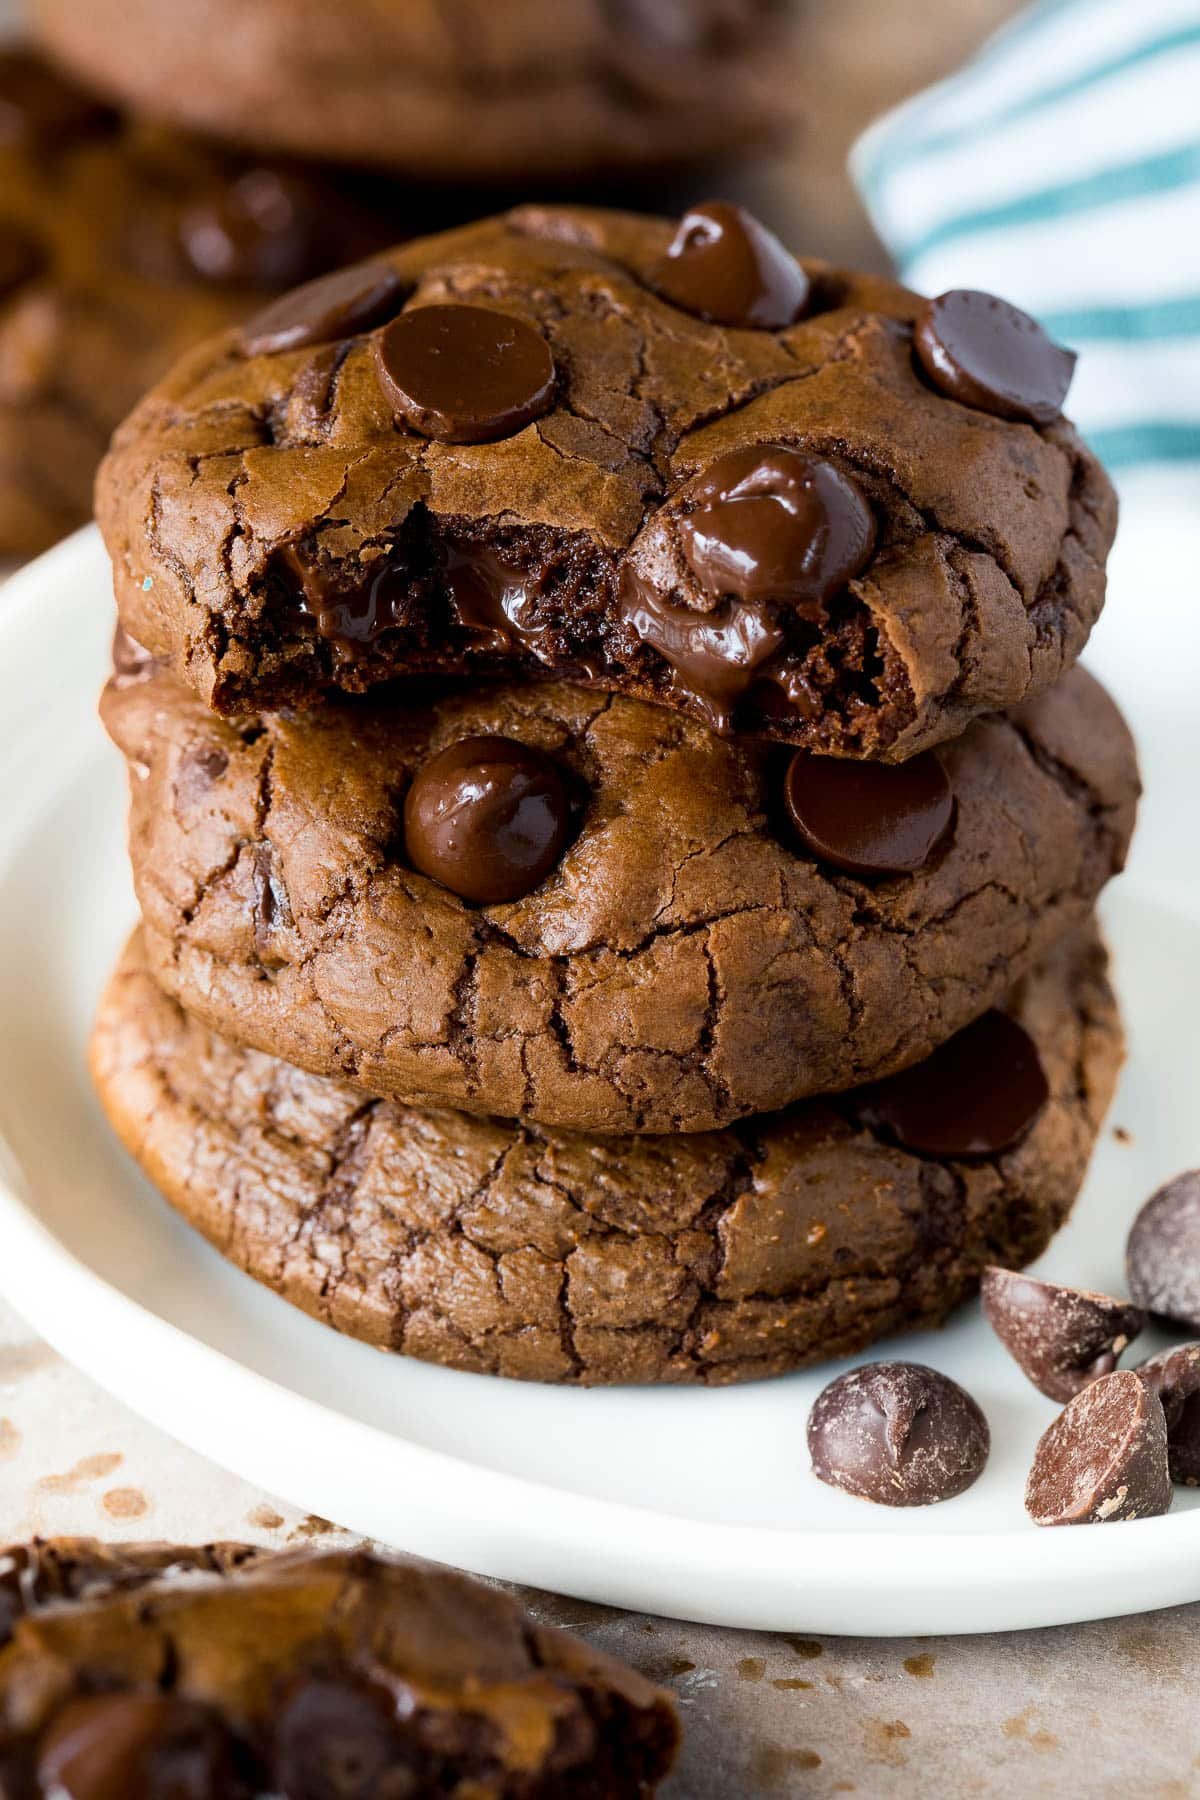 A stack of chocolate fudge cookies on a plate.